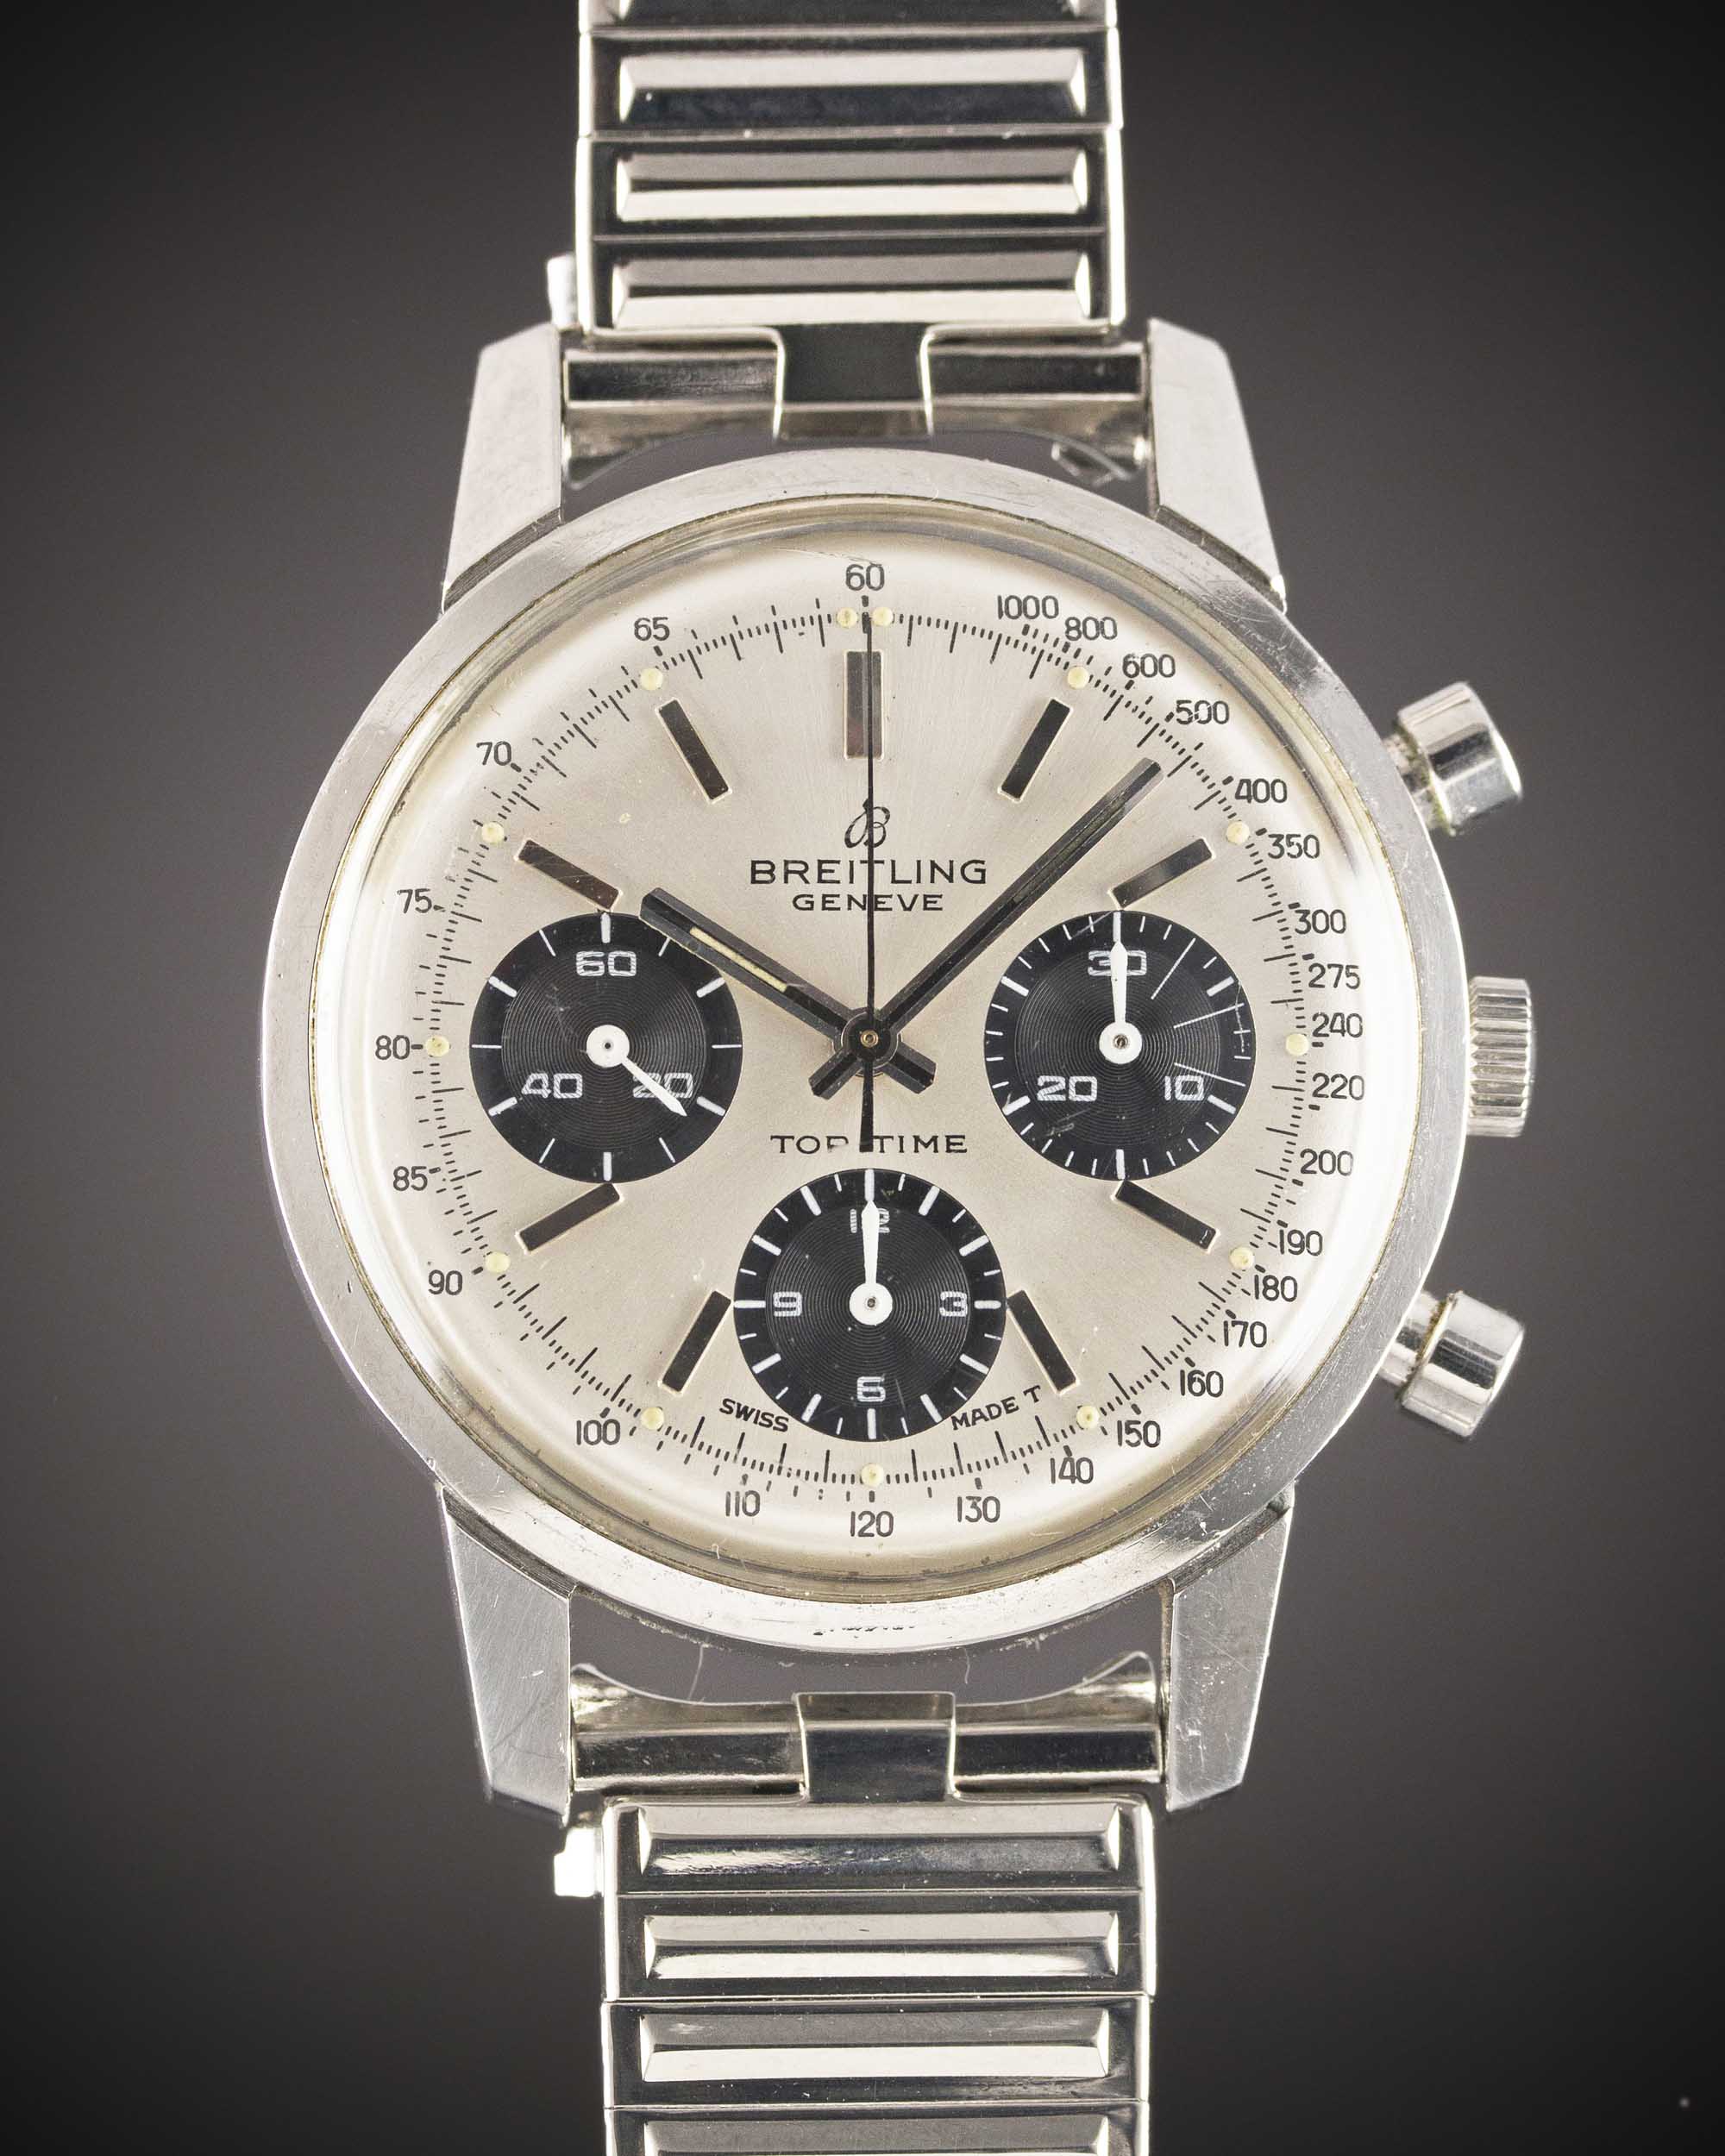 A GENTLEMAN'S STAINLESS STEEL BREITLING TOP TIME CHRONOGRAPH BRACELET WATCH CIRCA 1968, REF. 810 - Image 2 of 2